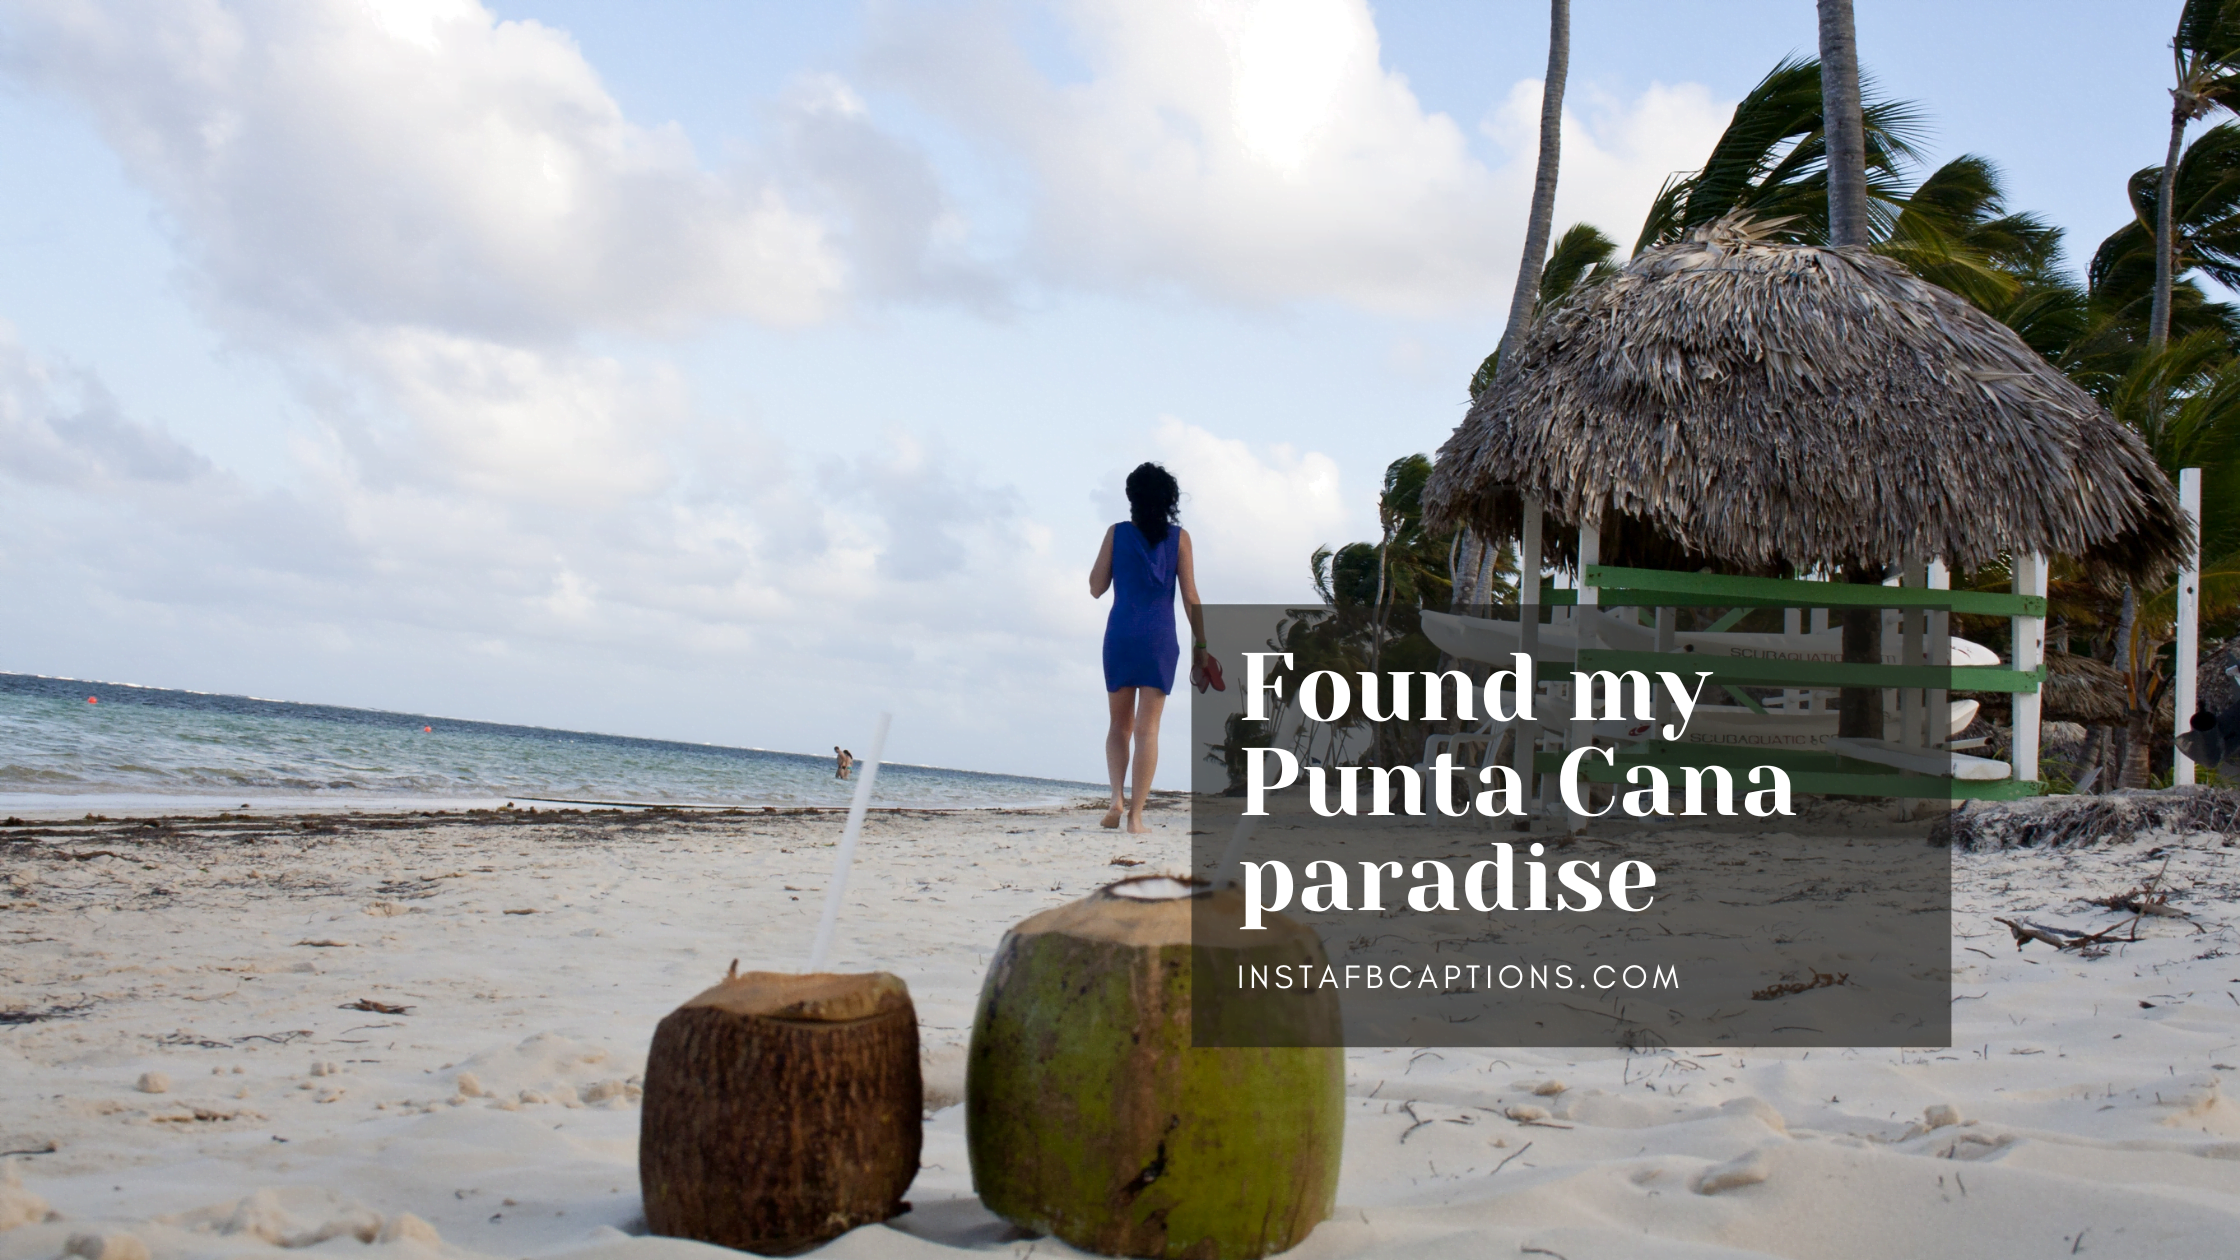 Punta Cana Quotes And Captions  - Punta Cana Quotes and Captions  - Punta Cana Captions for Posting on Instagram in 2023